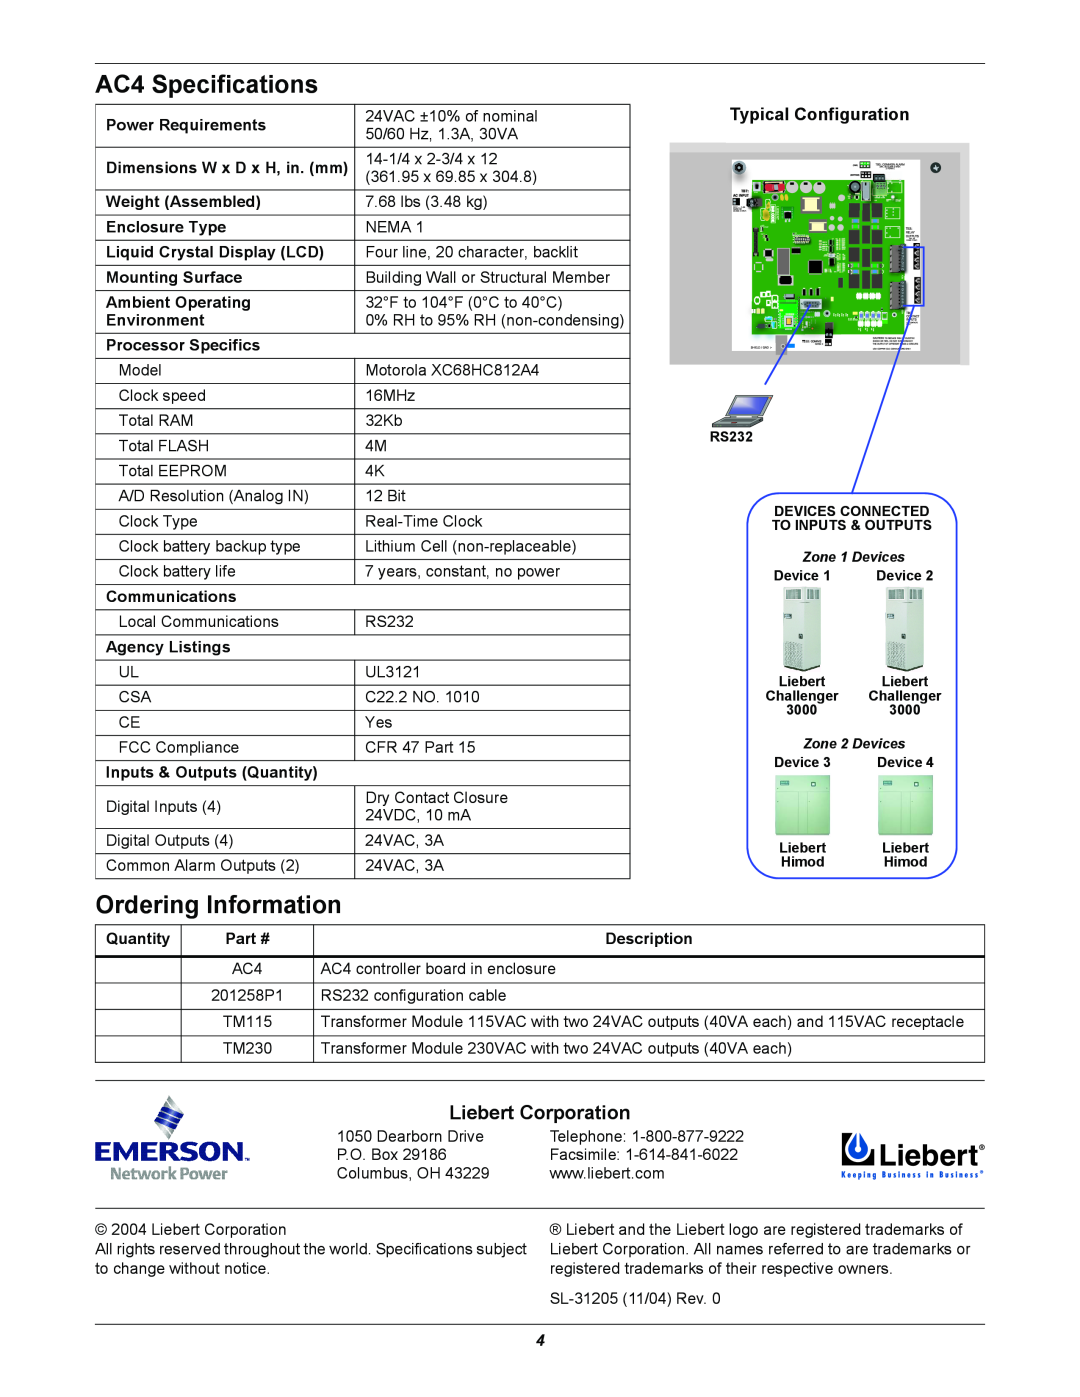 Liebert manual AC4 Specifications, Ordering Information, Liebert Corporation, Typical Configuration 